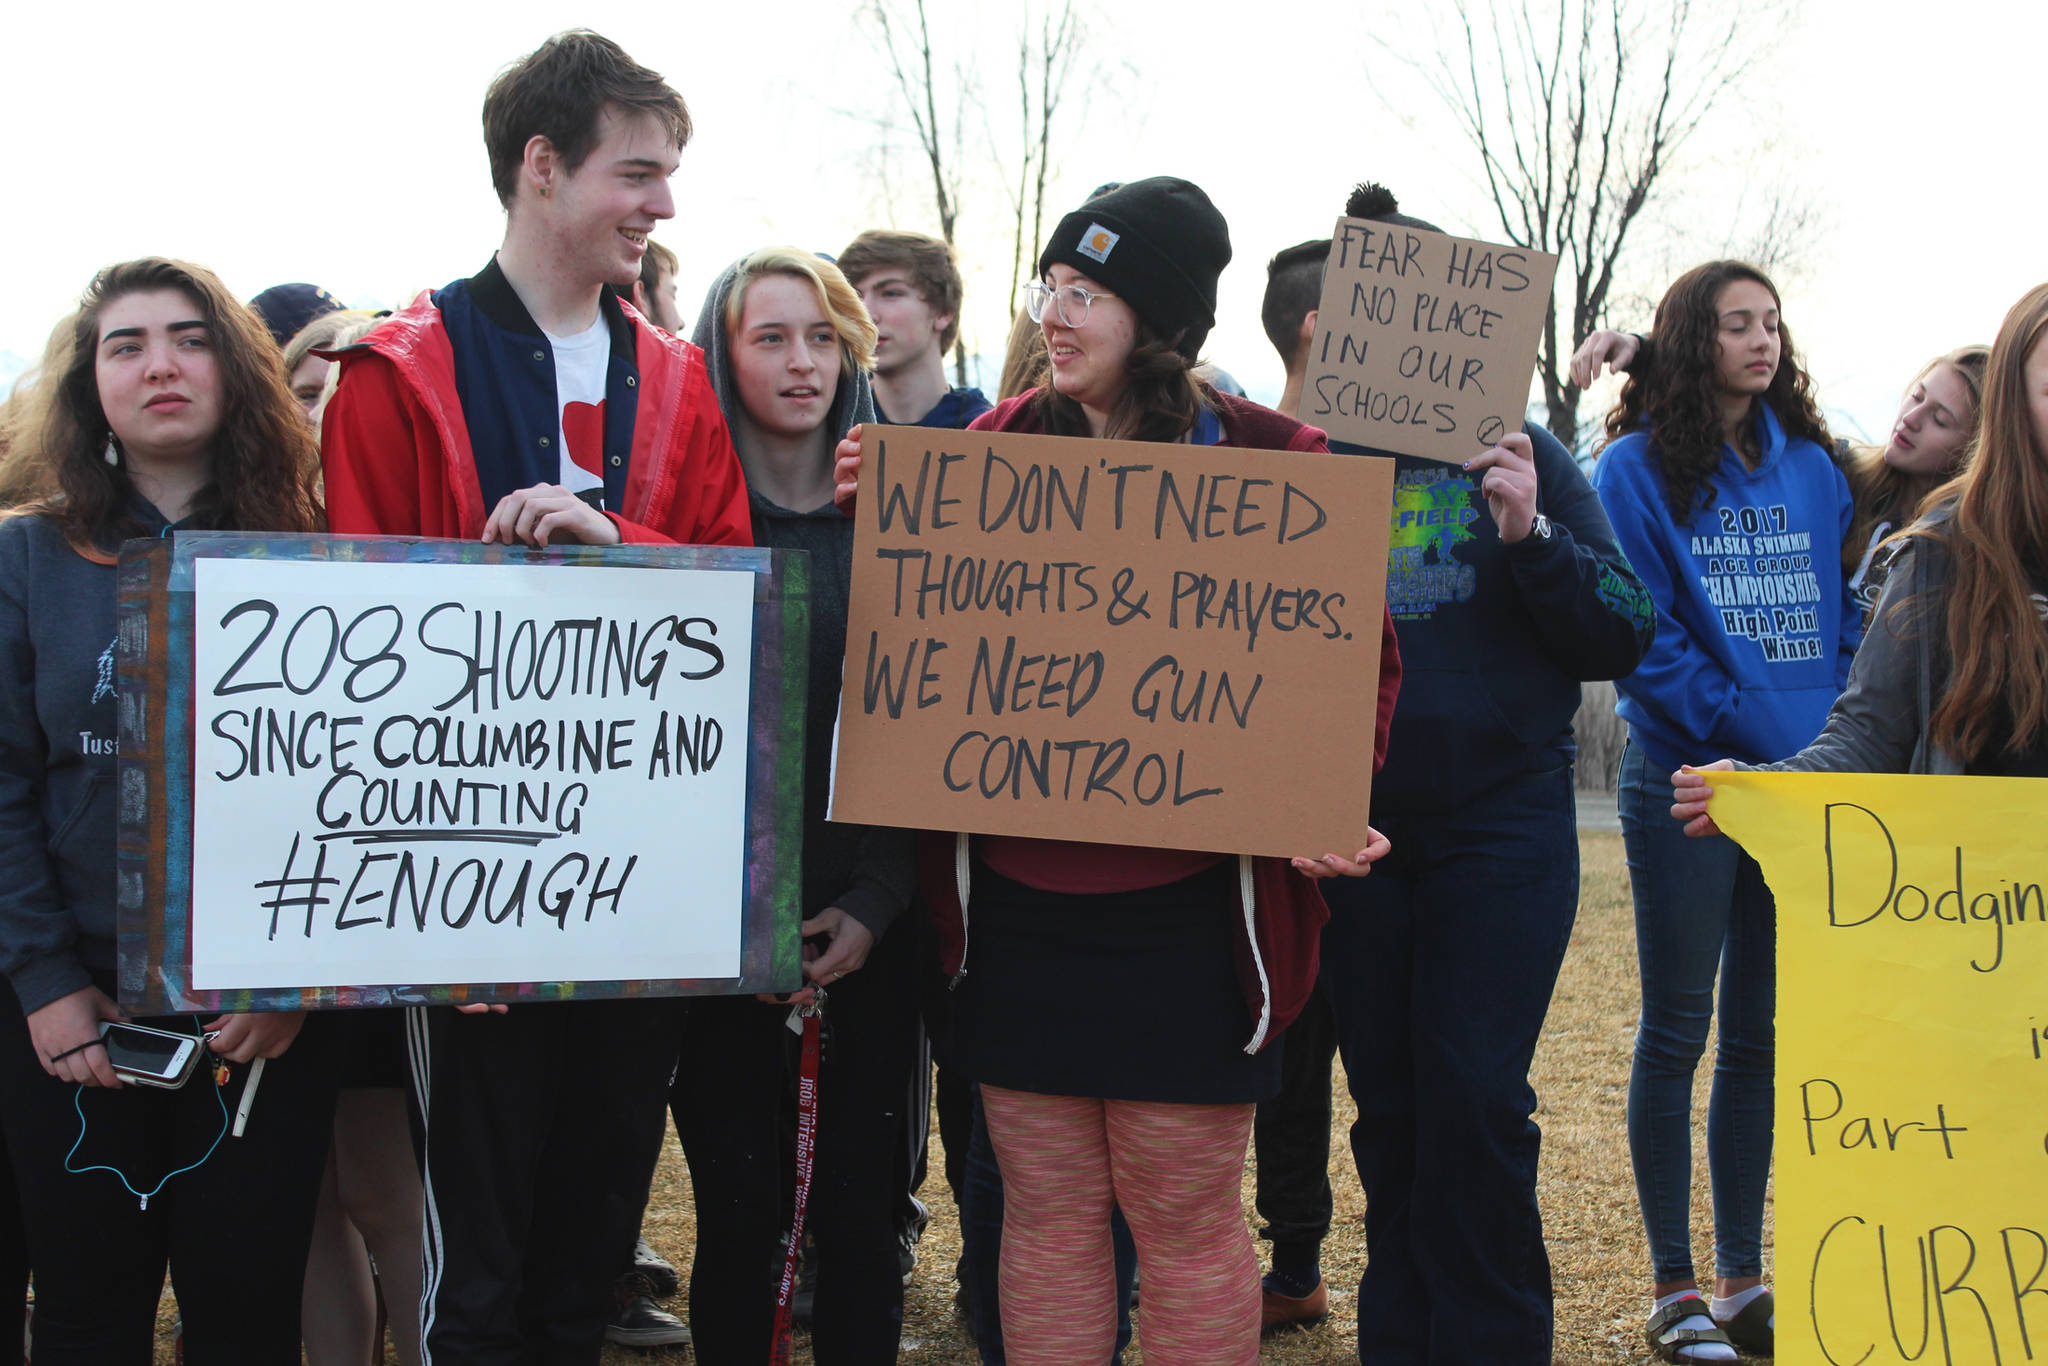 Senior Elan Carroll and senior Drew Wimmerstedt stand with about 100 of their classmates, and some staff, during a walkout Wednesday, Feb. 21, 2018 at Homer High School in Homer, Alaska. The signs, made by Wimmerstedt, read “208 shootings since Columbine and counting. #Enough,” and “We don’t need thoughts and prayers, we need gun control.” (Photo by Megan Pacer/Homer News)